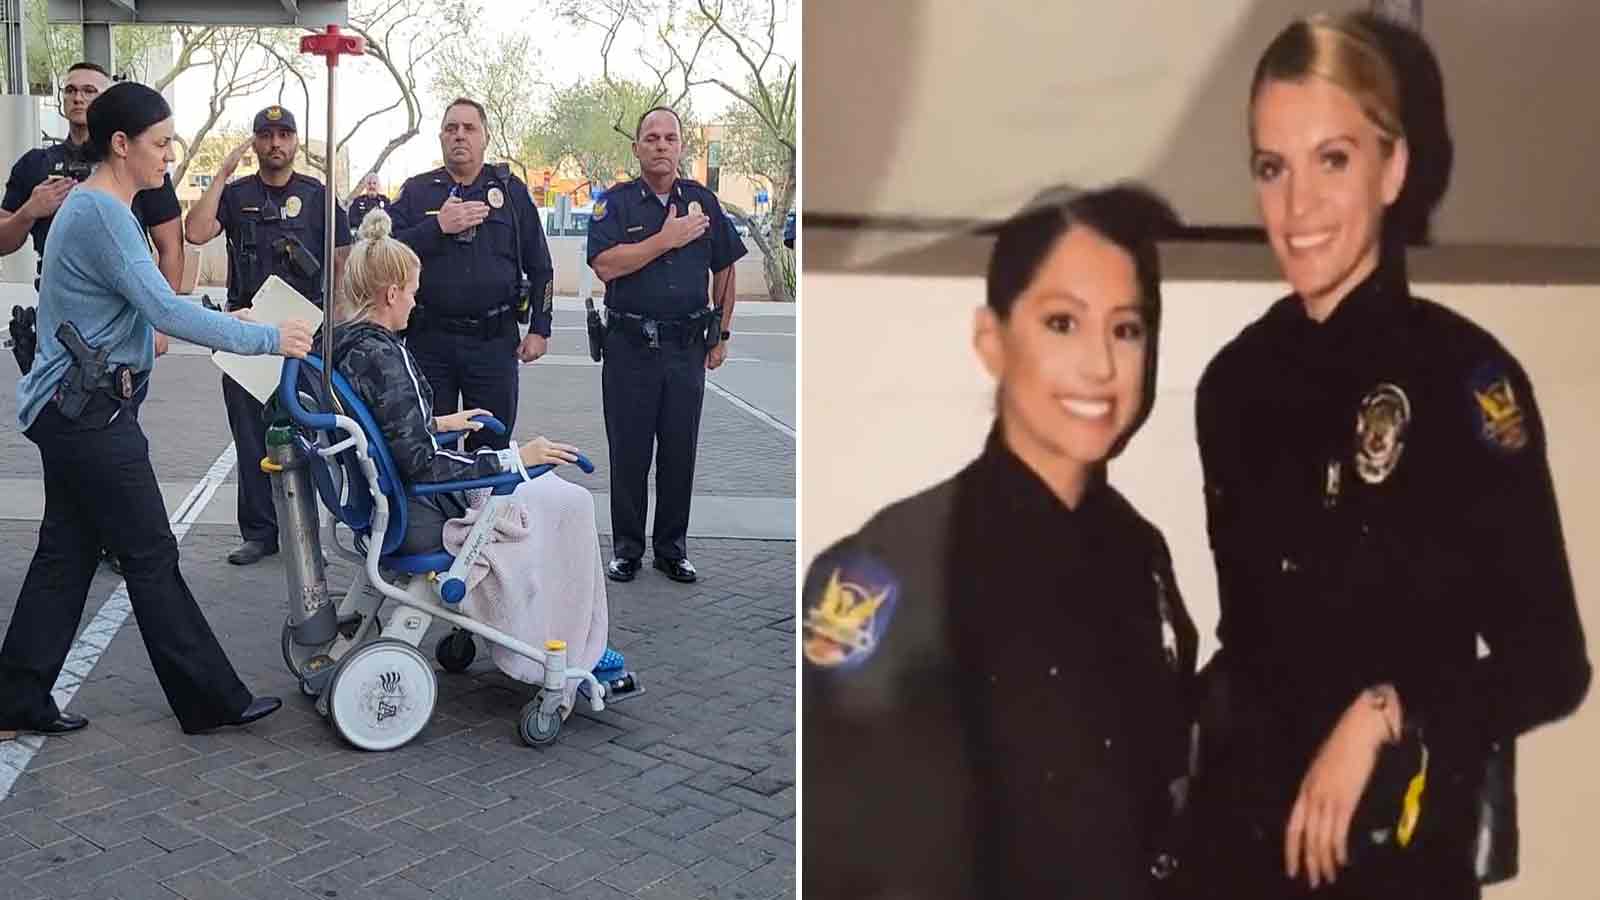 Phoenix officer back to patrol after being shot several months ago